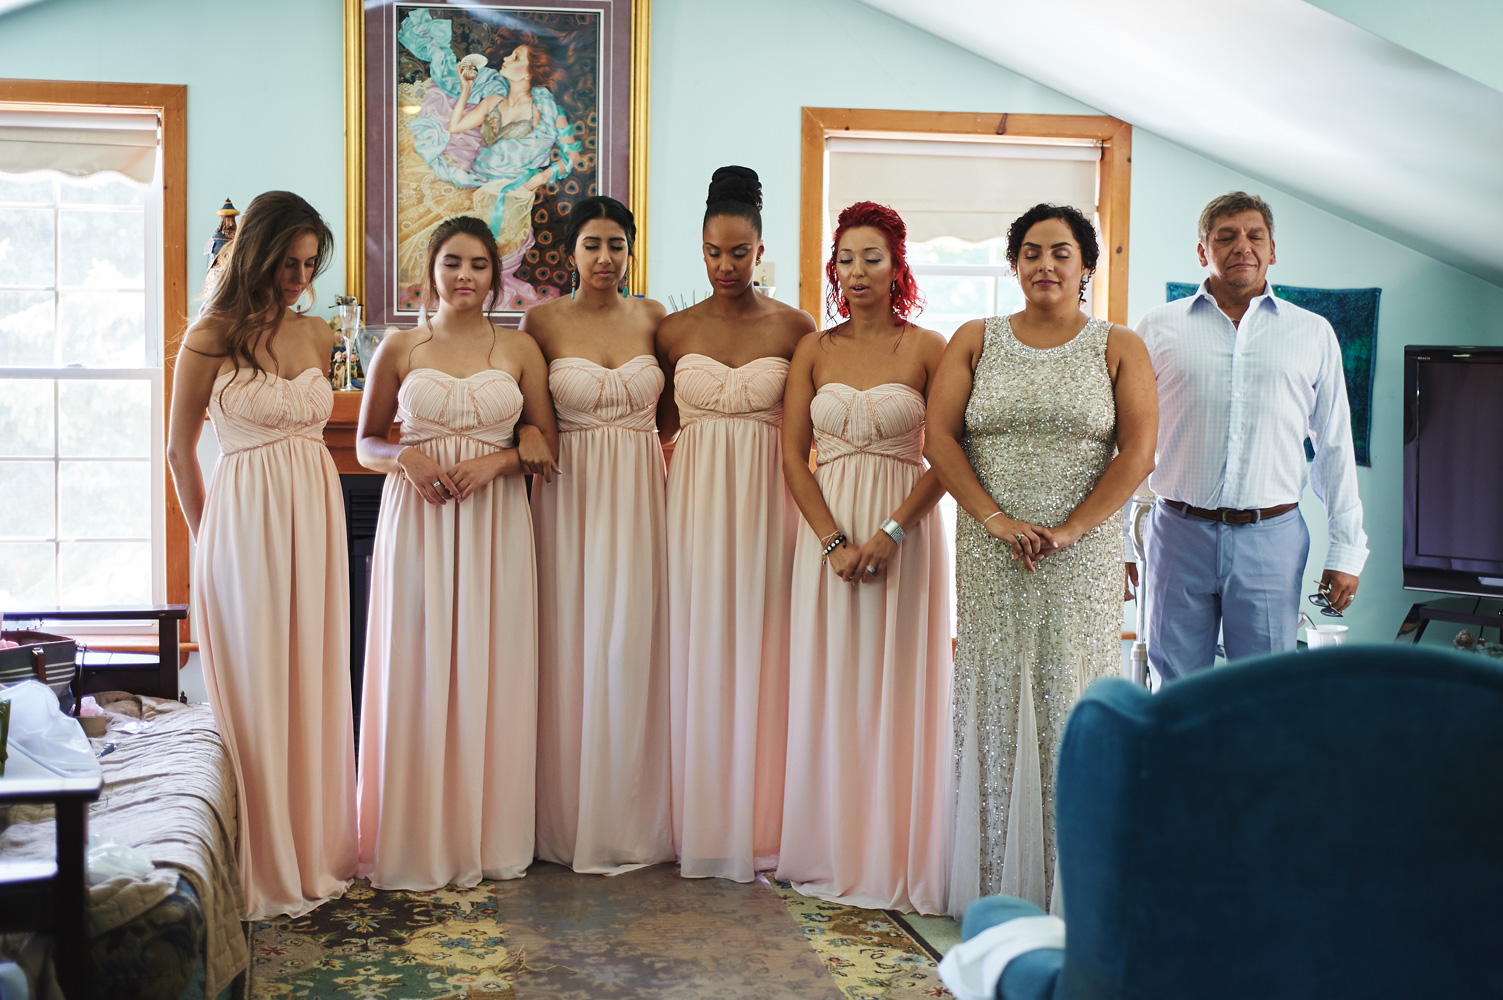 bridal-party-closing-their-eyes-for-the-bride's-reveal.jpg